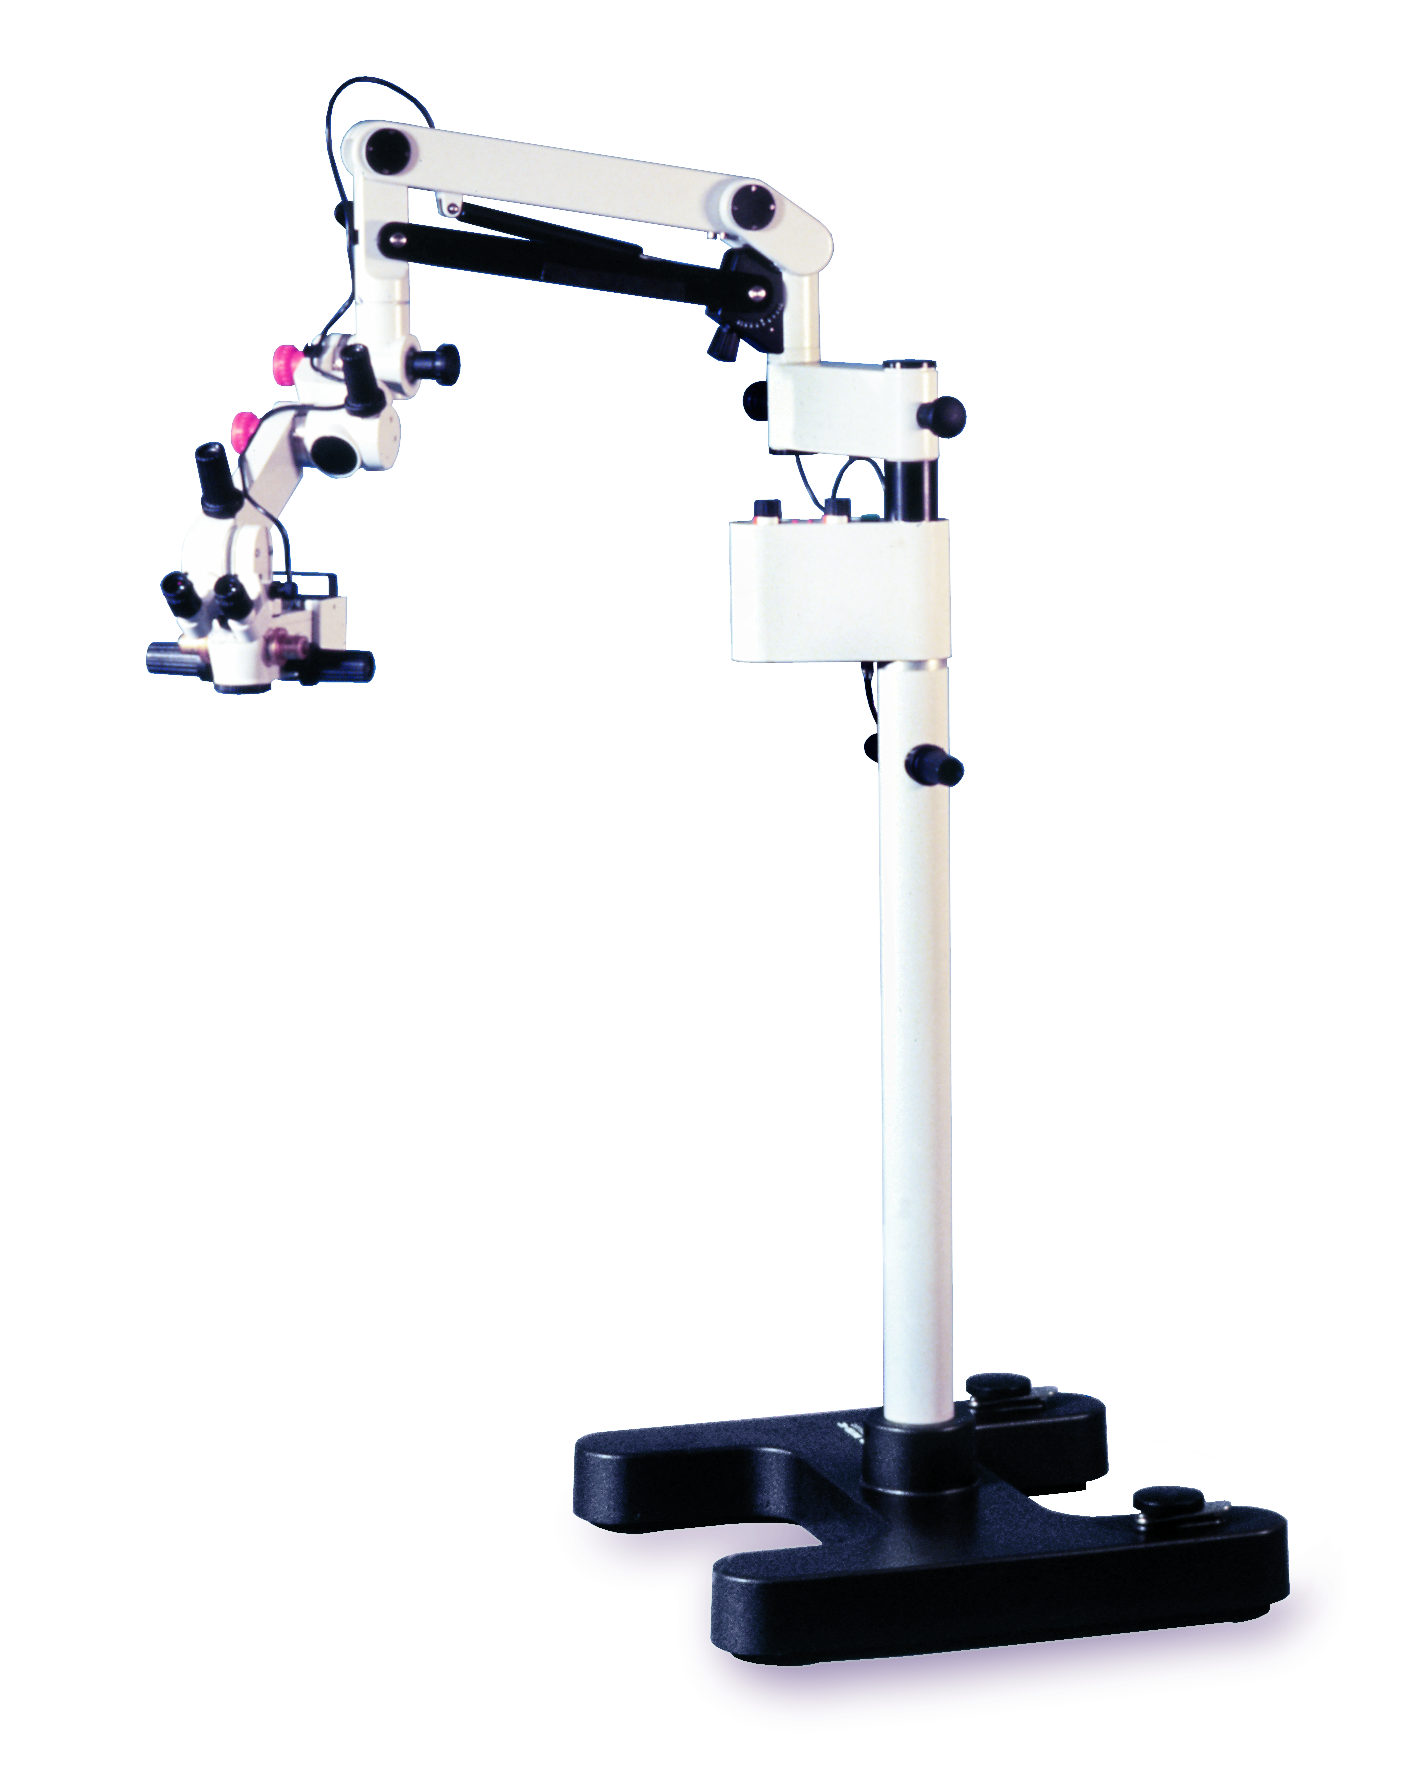 The Leica M651 manual surgical microscope for microsurgical procedures.